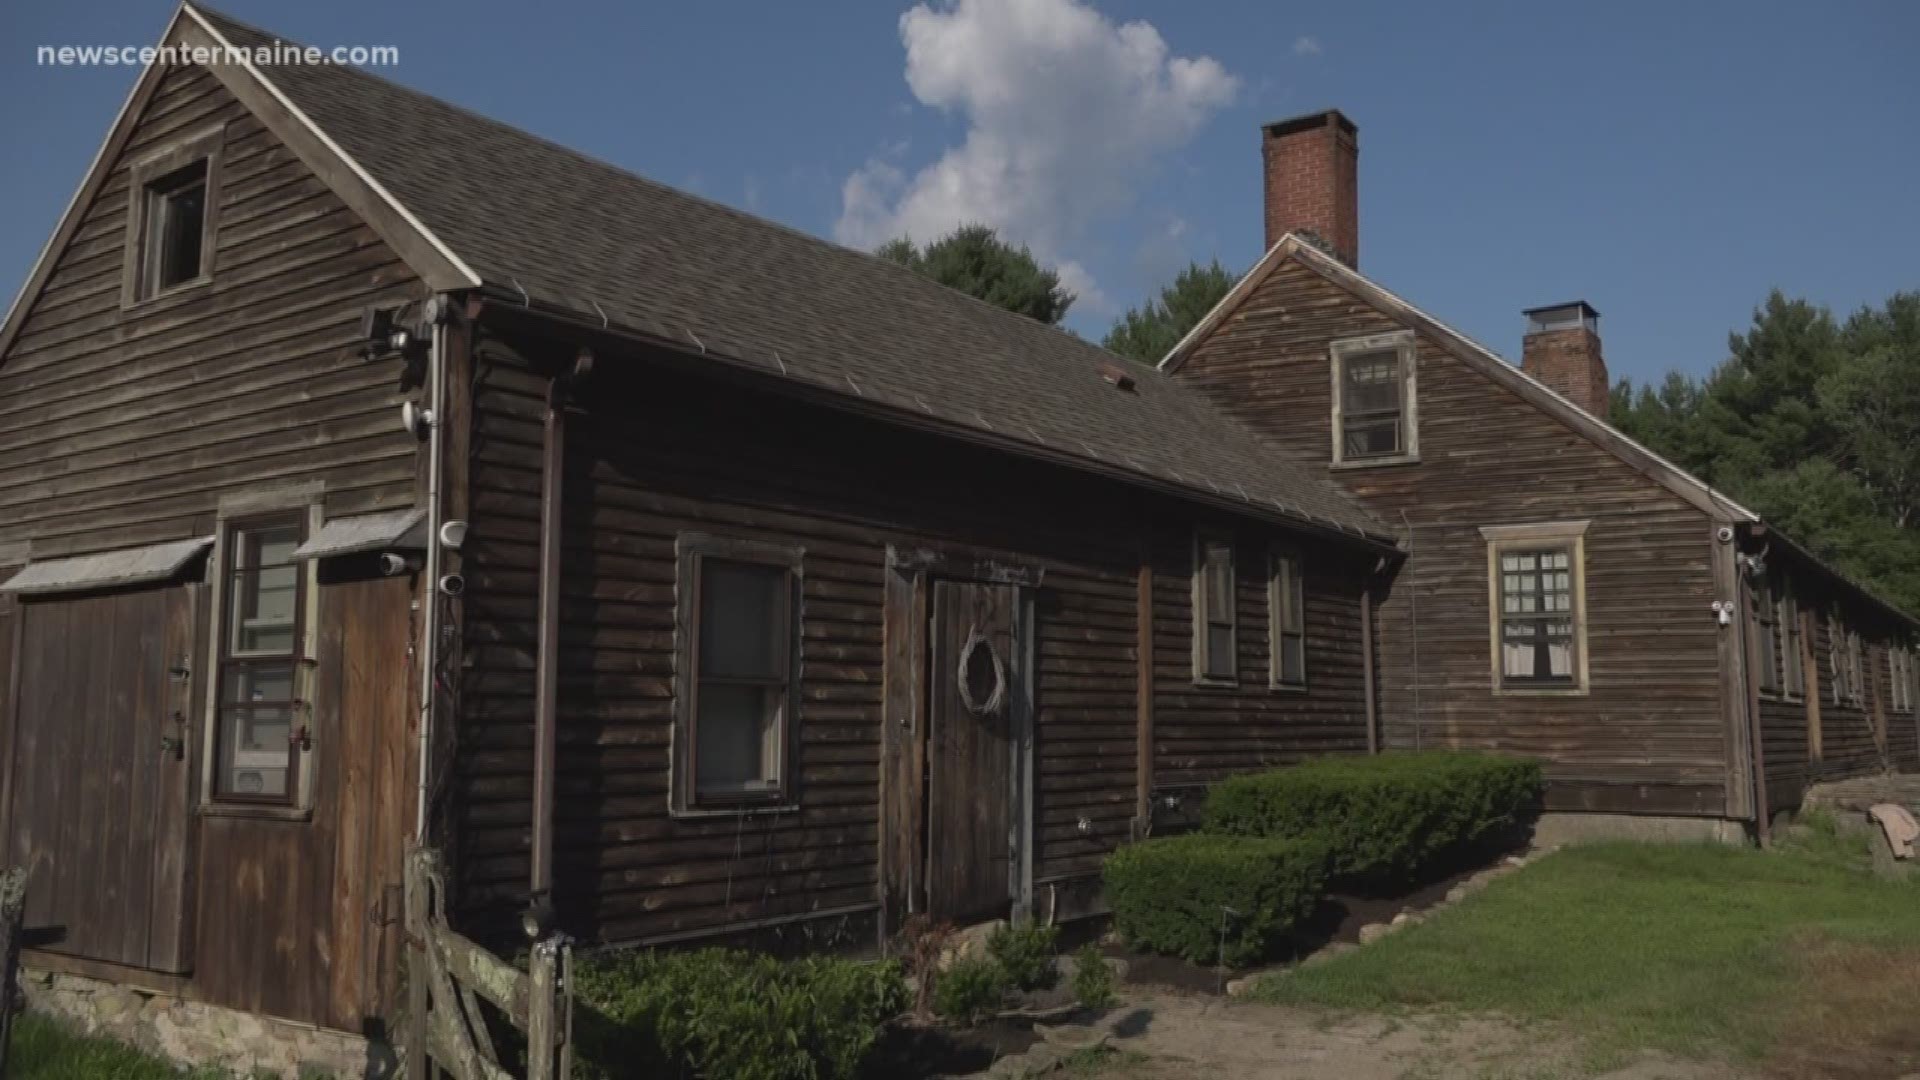 The 2013 film 'The Conjuring' is reportedly based off of events that happened in 1973 in this Rhode Island home.